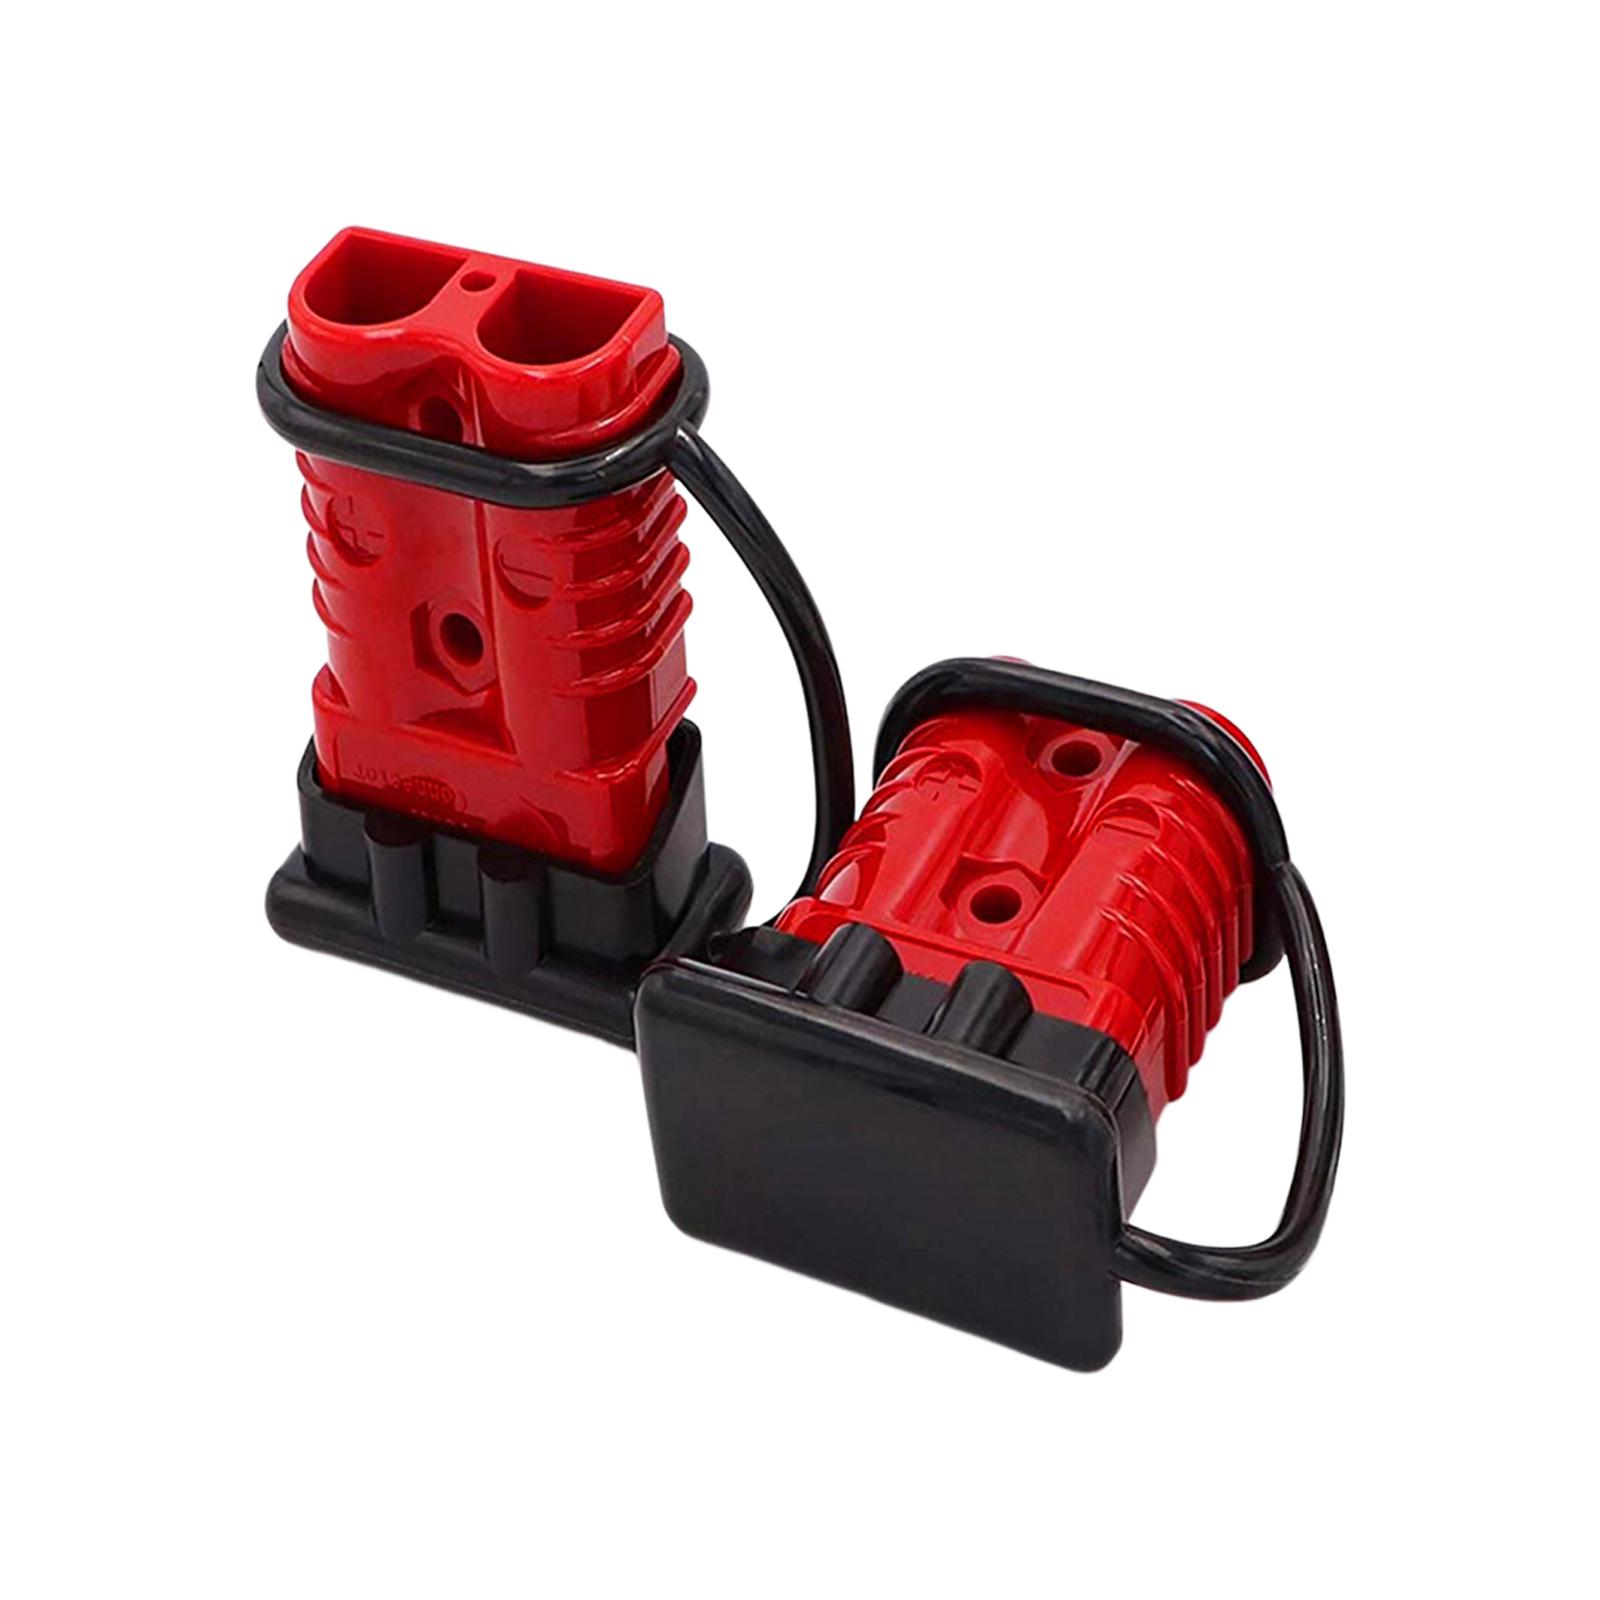 Battery Quick Connect Disconnect for Car Bike ATV Winches Lifts Motors Red